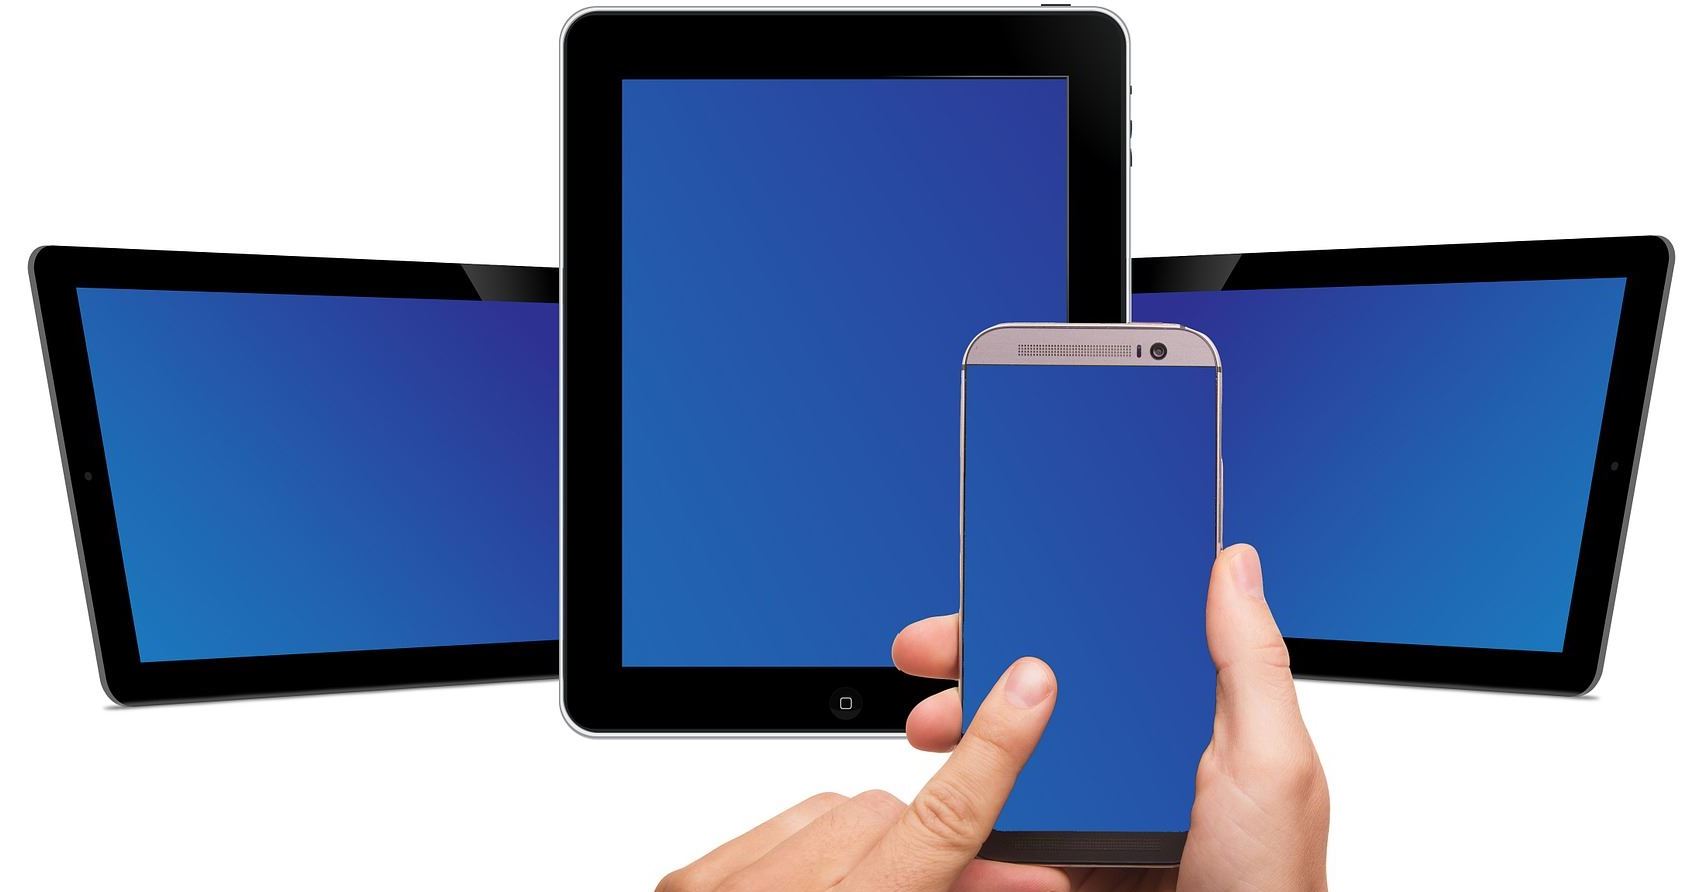 Three tablet computers behind hands holding a smartphone